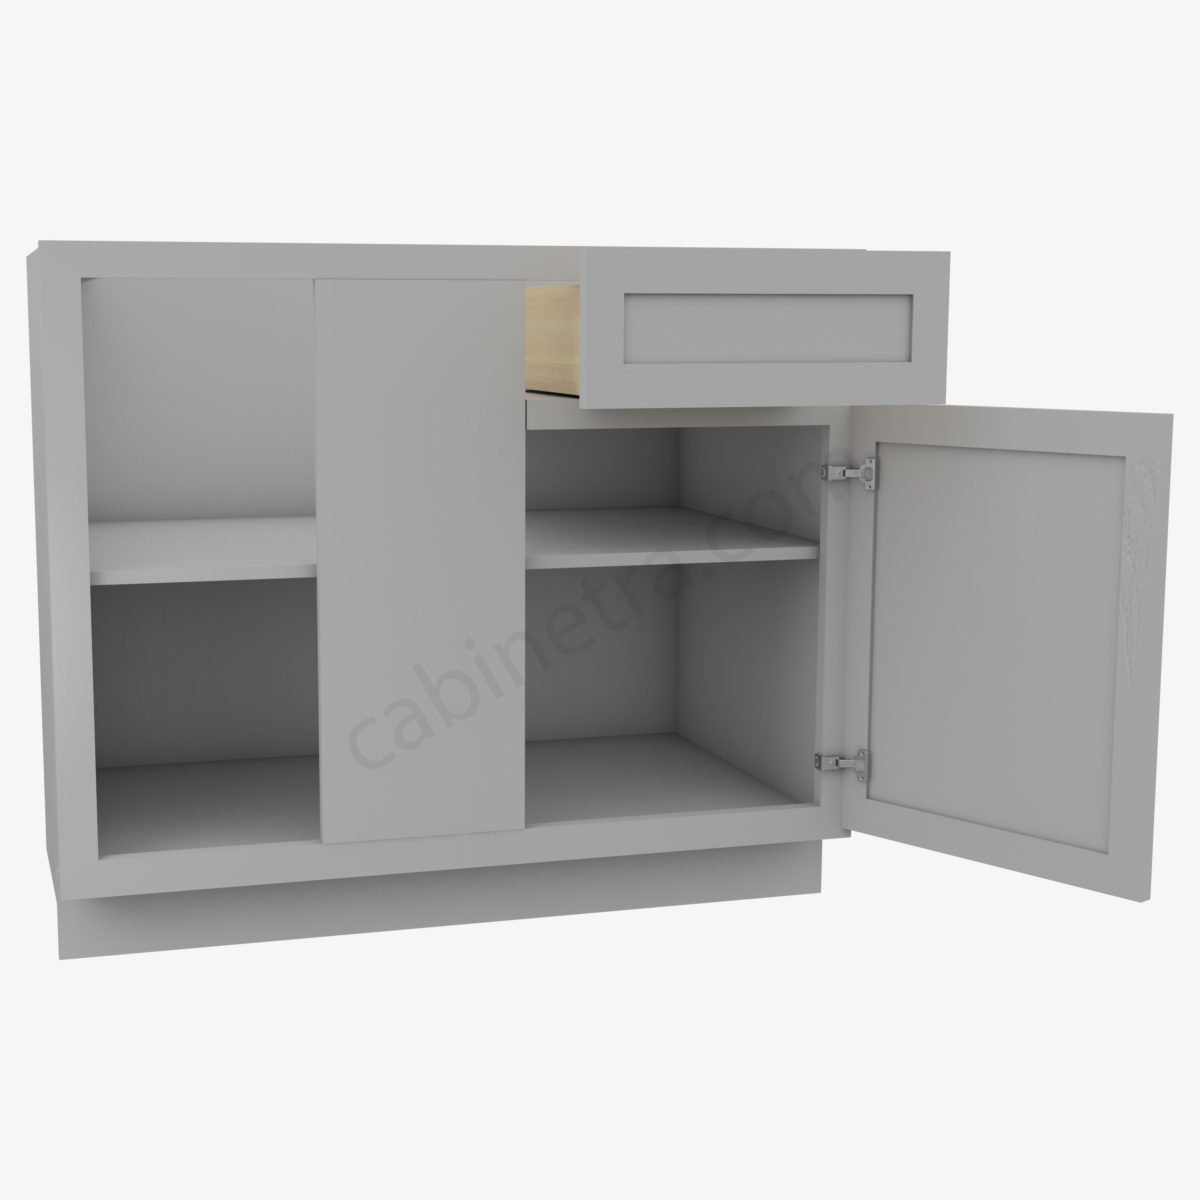 AB BBLC42 45 39W 1 Forevermark Lait Gray Shaker Cabinetra scaled